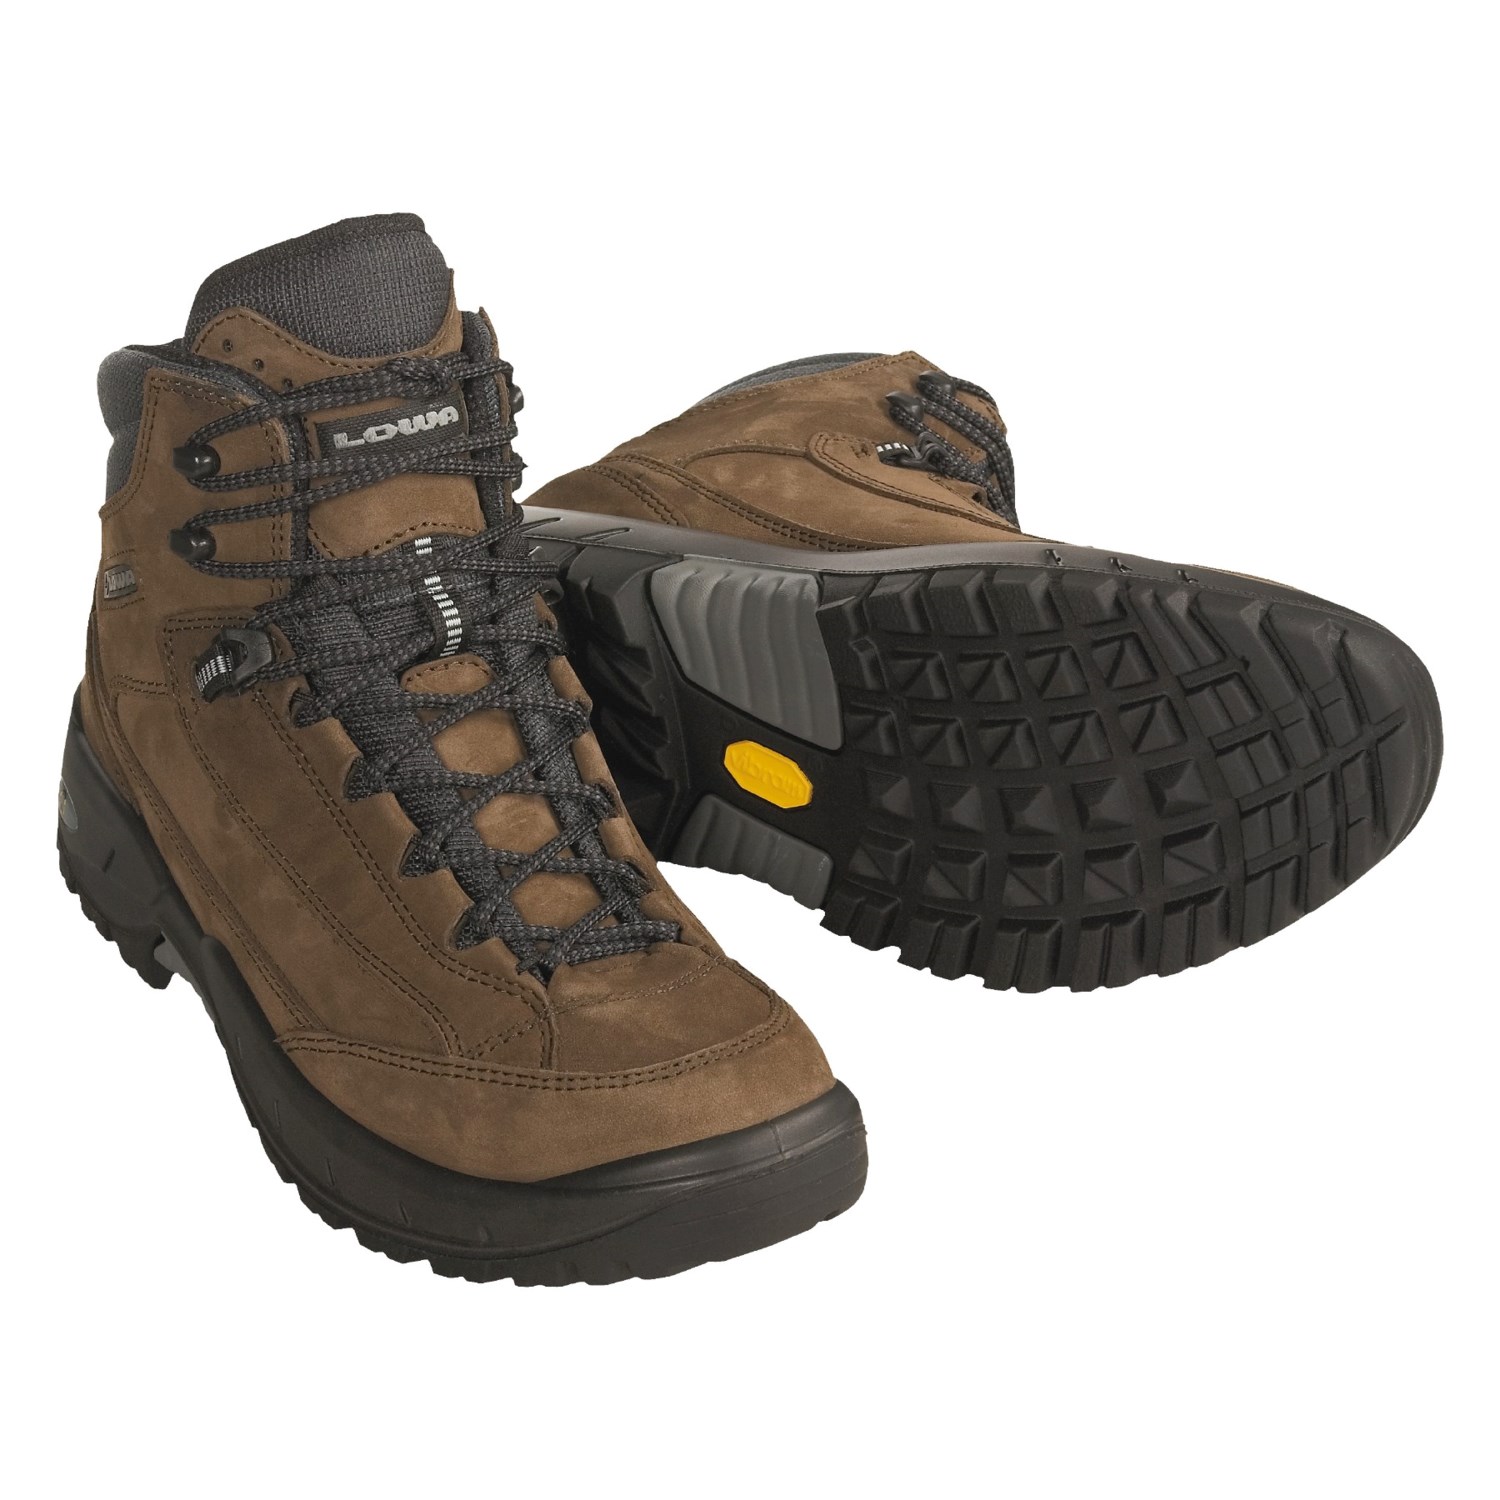 Lowa Strato Mid Hiking Boots (For Men) 1077F - Save 37%